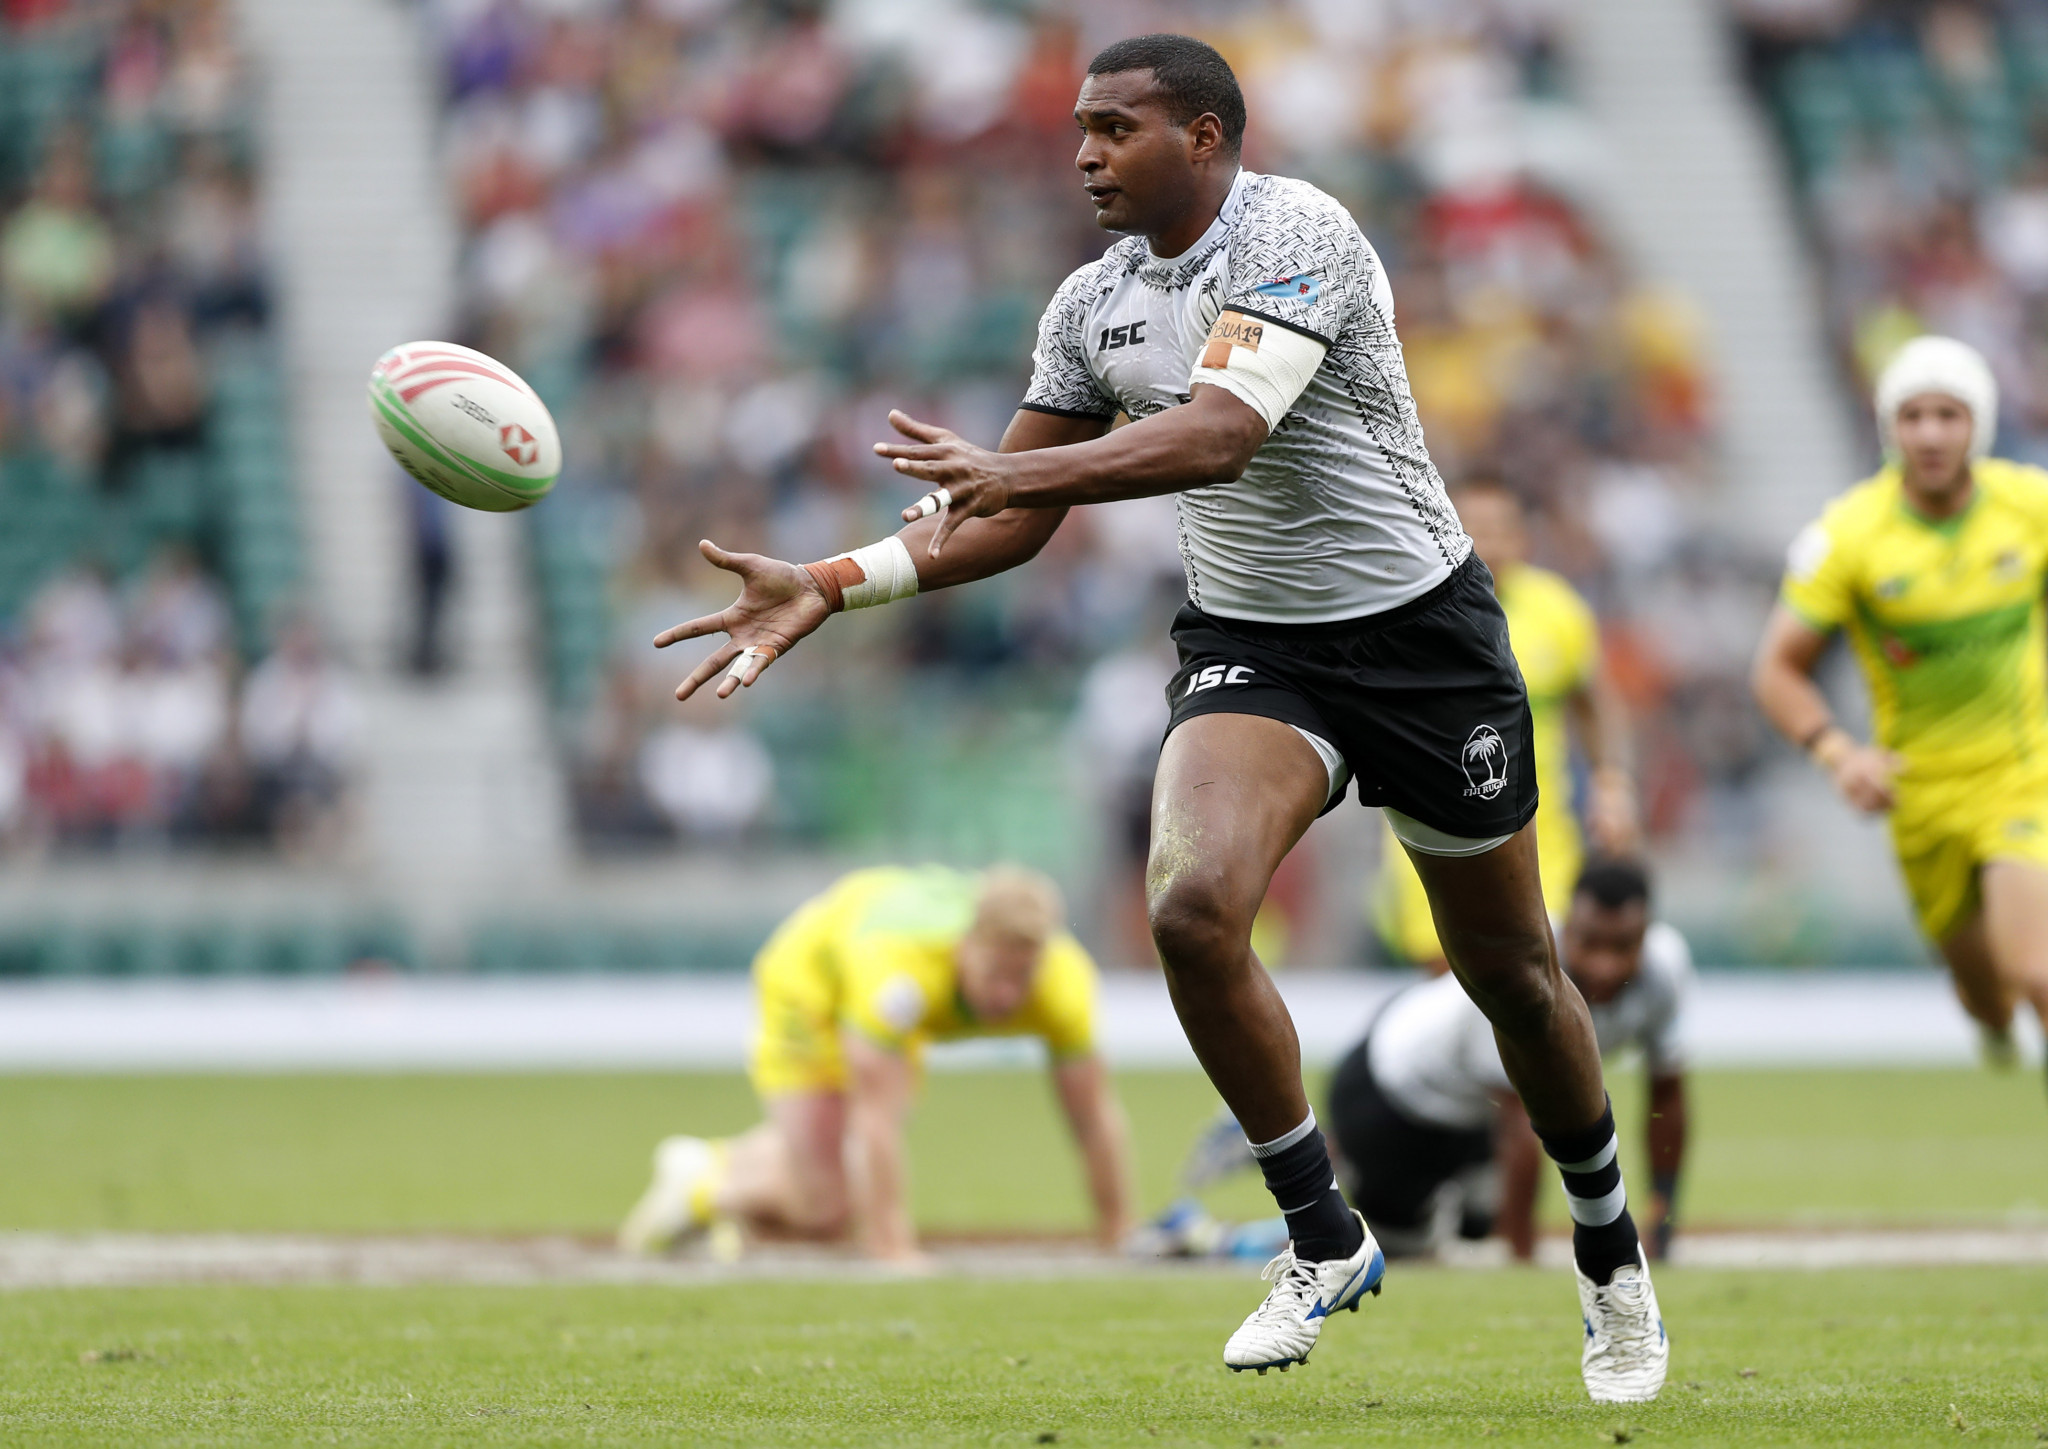 Fiji and US set to battle it out for top spot at World Rugby Sevens Series finale